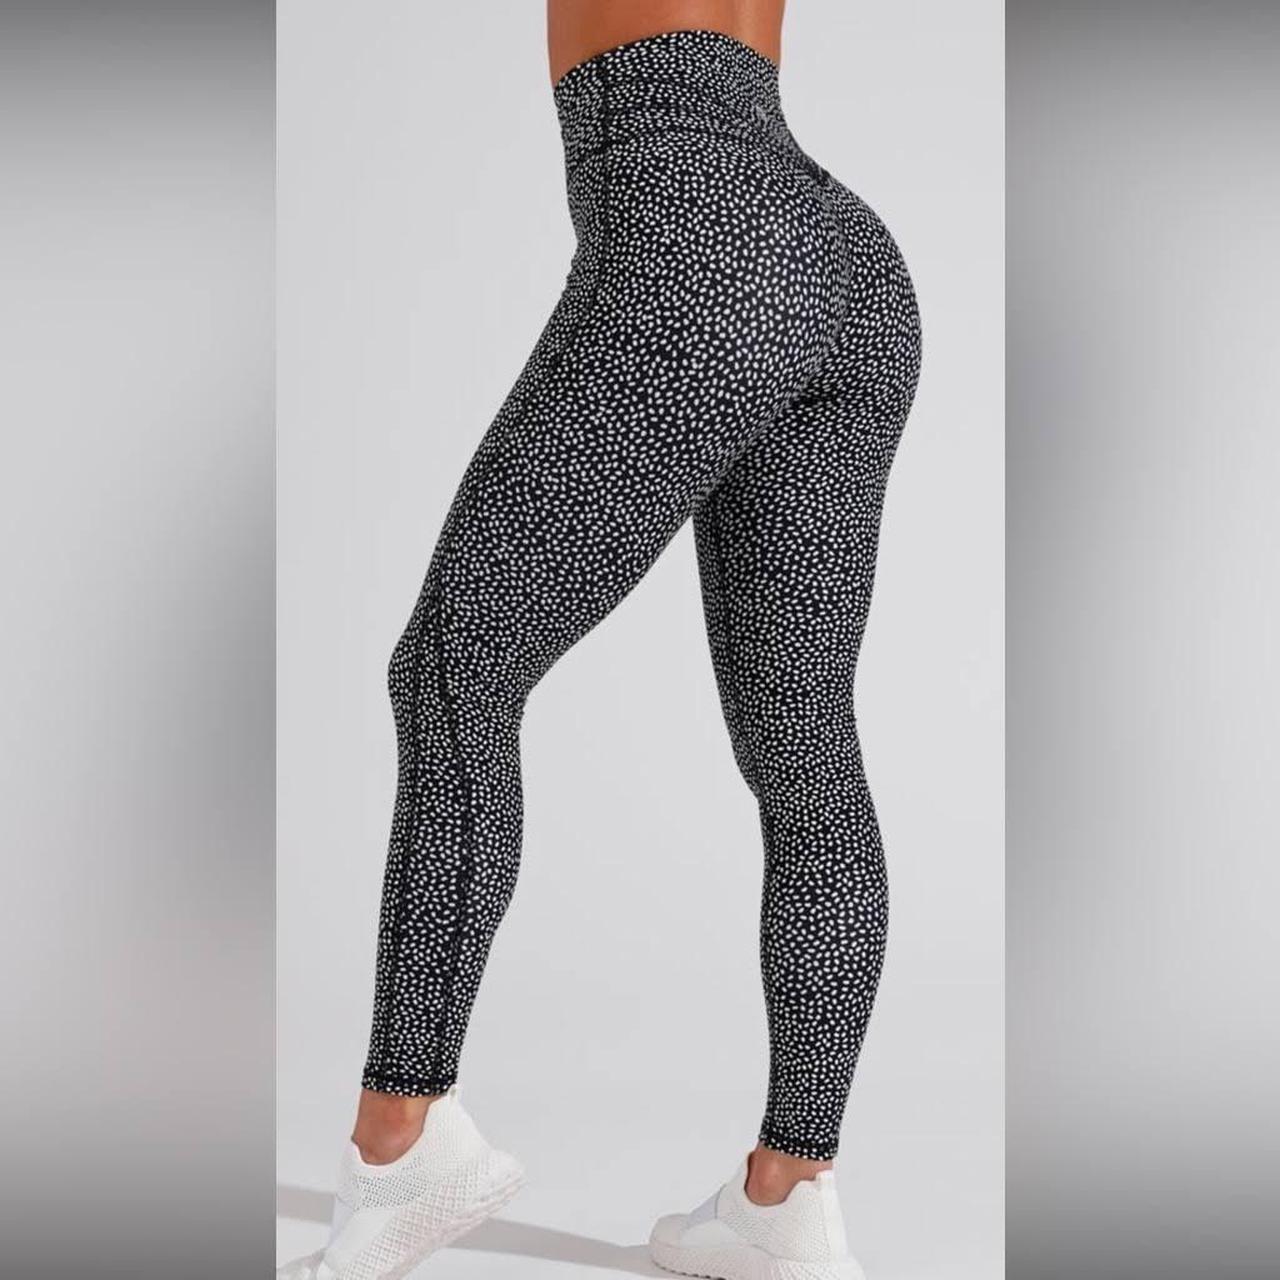 Buffbunny Legacy Legging Size L Nubre material with - Depop